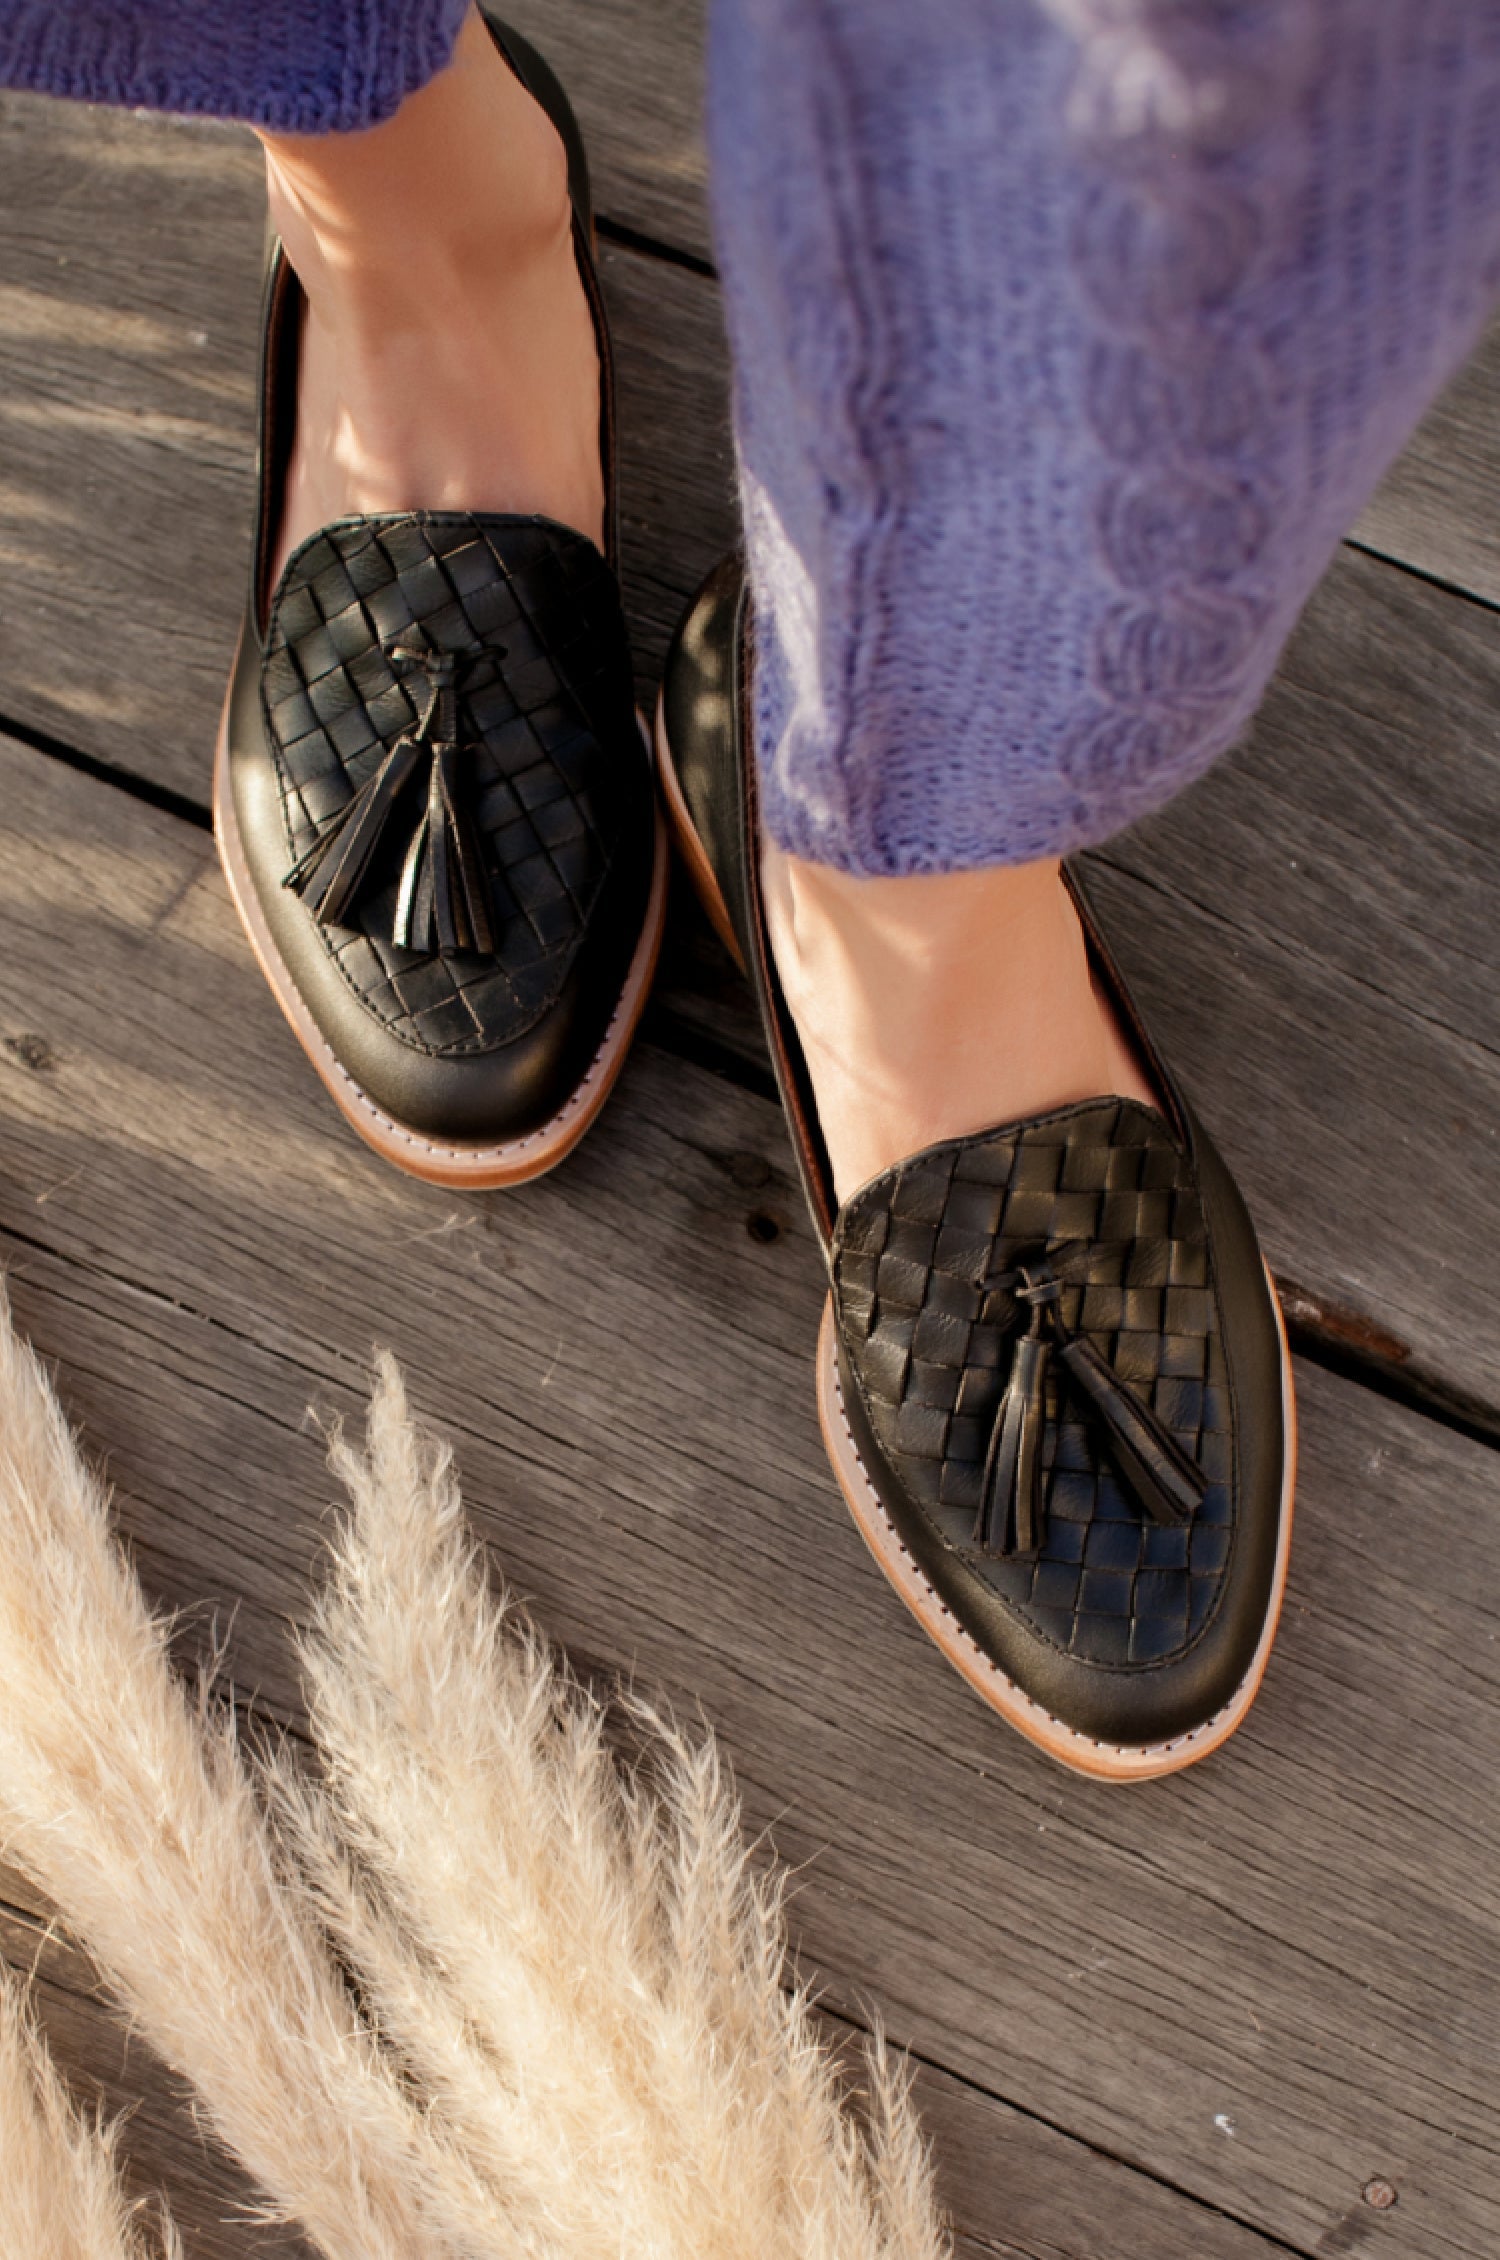 Nikita Woven Leather Loafers by ELF